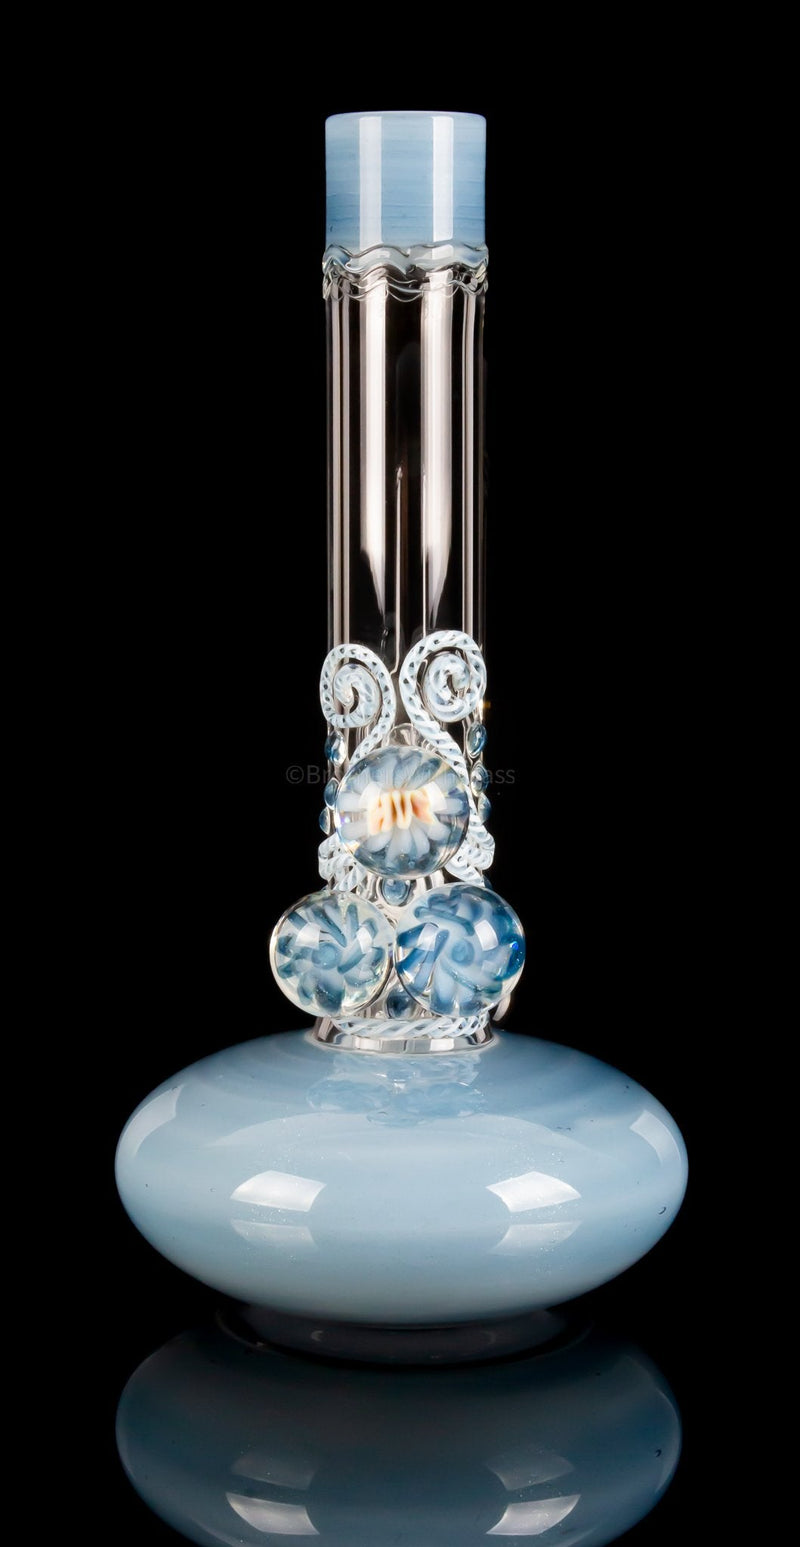 HVY Glass Heady Color Bubble Bottom Bong With Marbles.